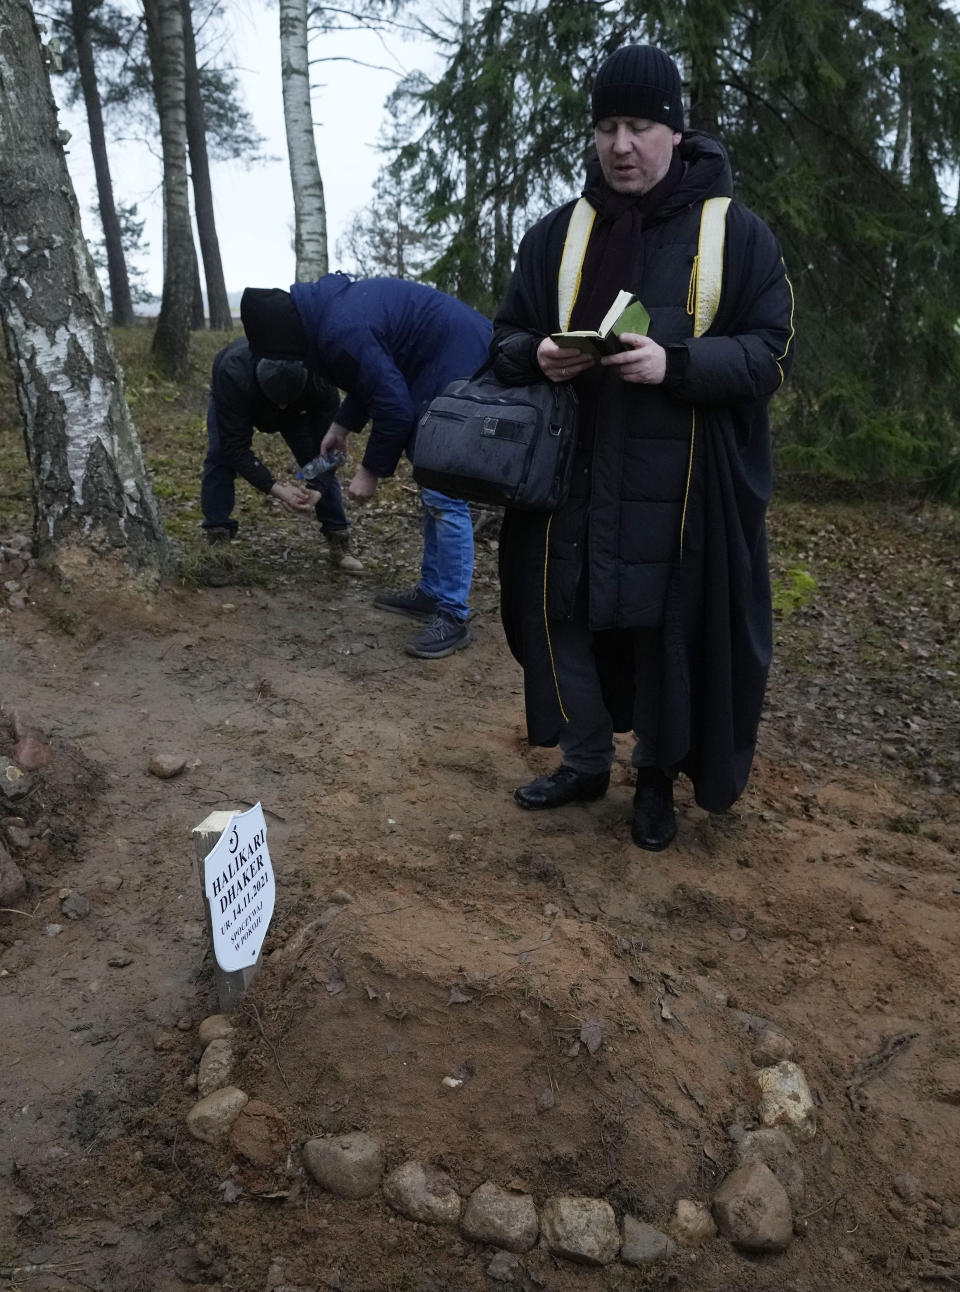 A Polish imam, right, and two other members of a Muslim community bury the tiny white casket of an unborn Iraqi boy, in Bohoniki, Poland, on Tuesday Nov. 23, 2021. The child is the latest life claimed as thousands of migrants from the Middle East have sought to enter the European Union but found their path cut off by a military build-up and fast approaching winter in the forests of Poland and Belarus. (AP Photo/Czarek Sokolowski)